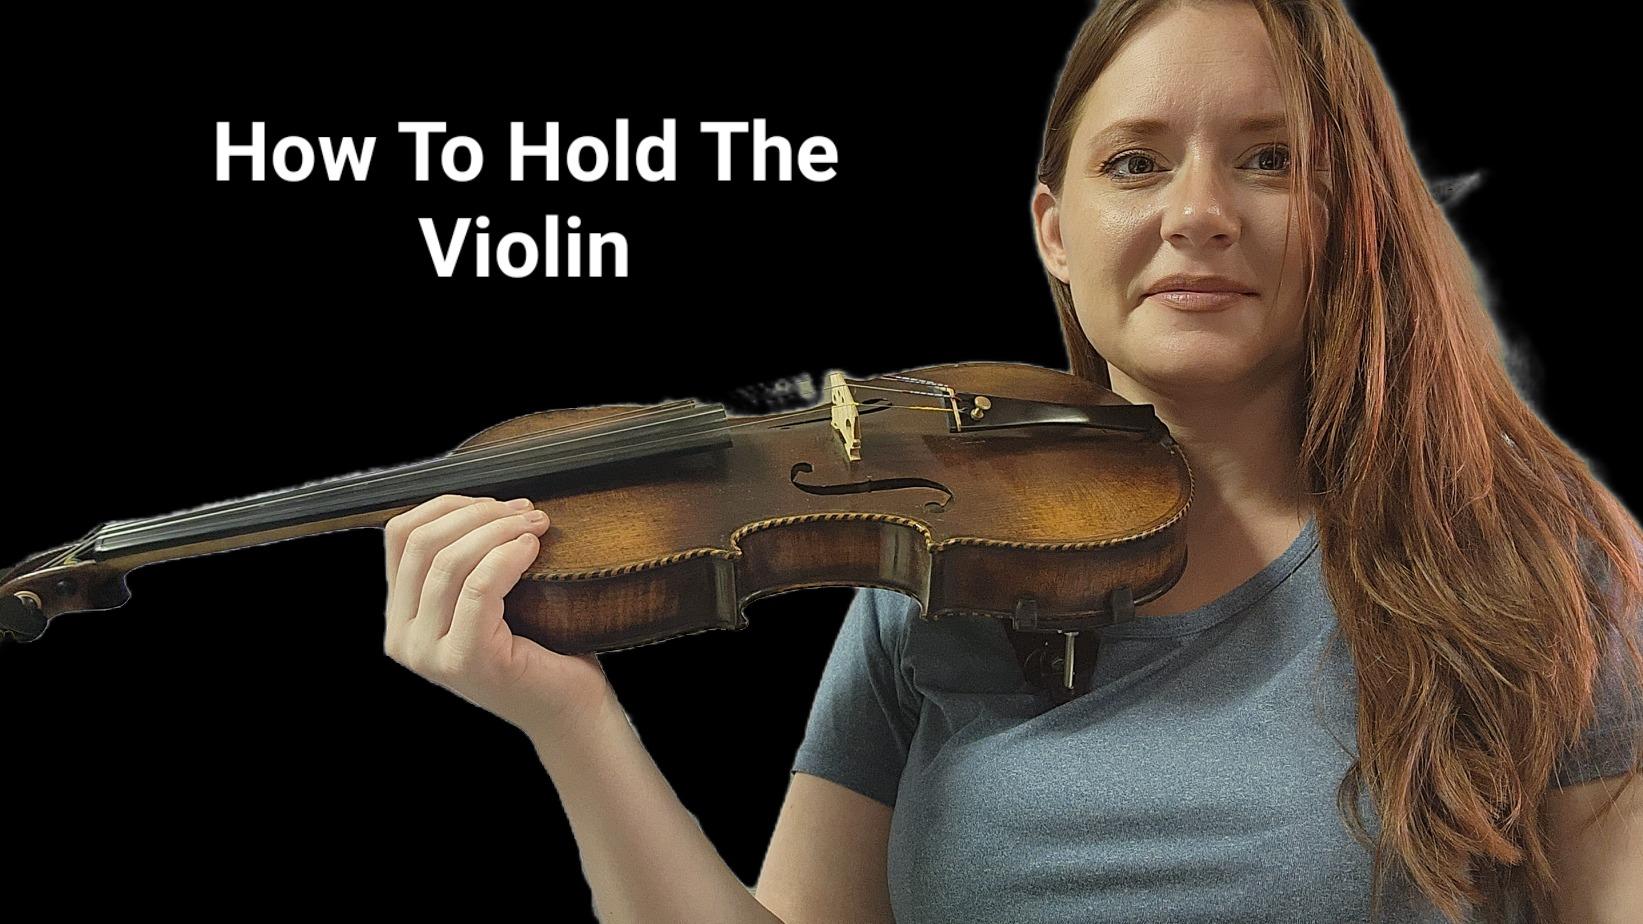 How To Hold The Violin or Viola